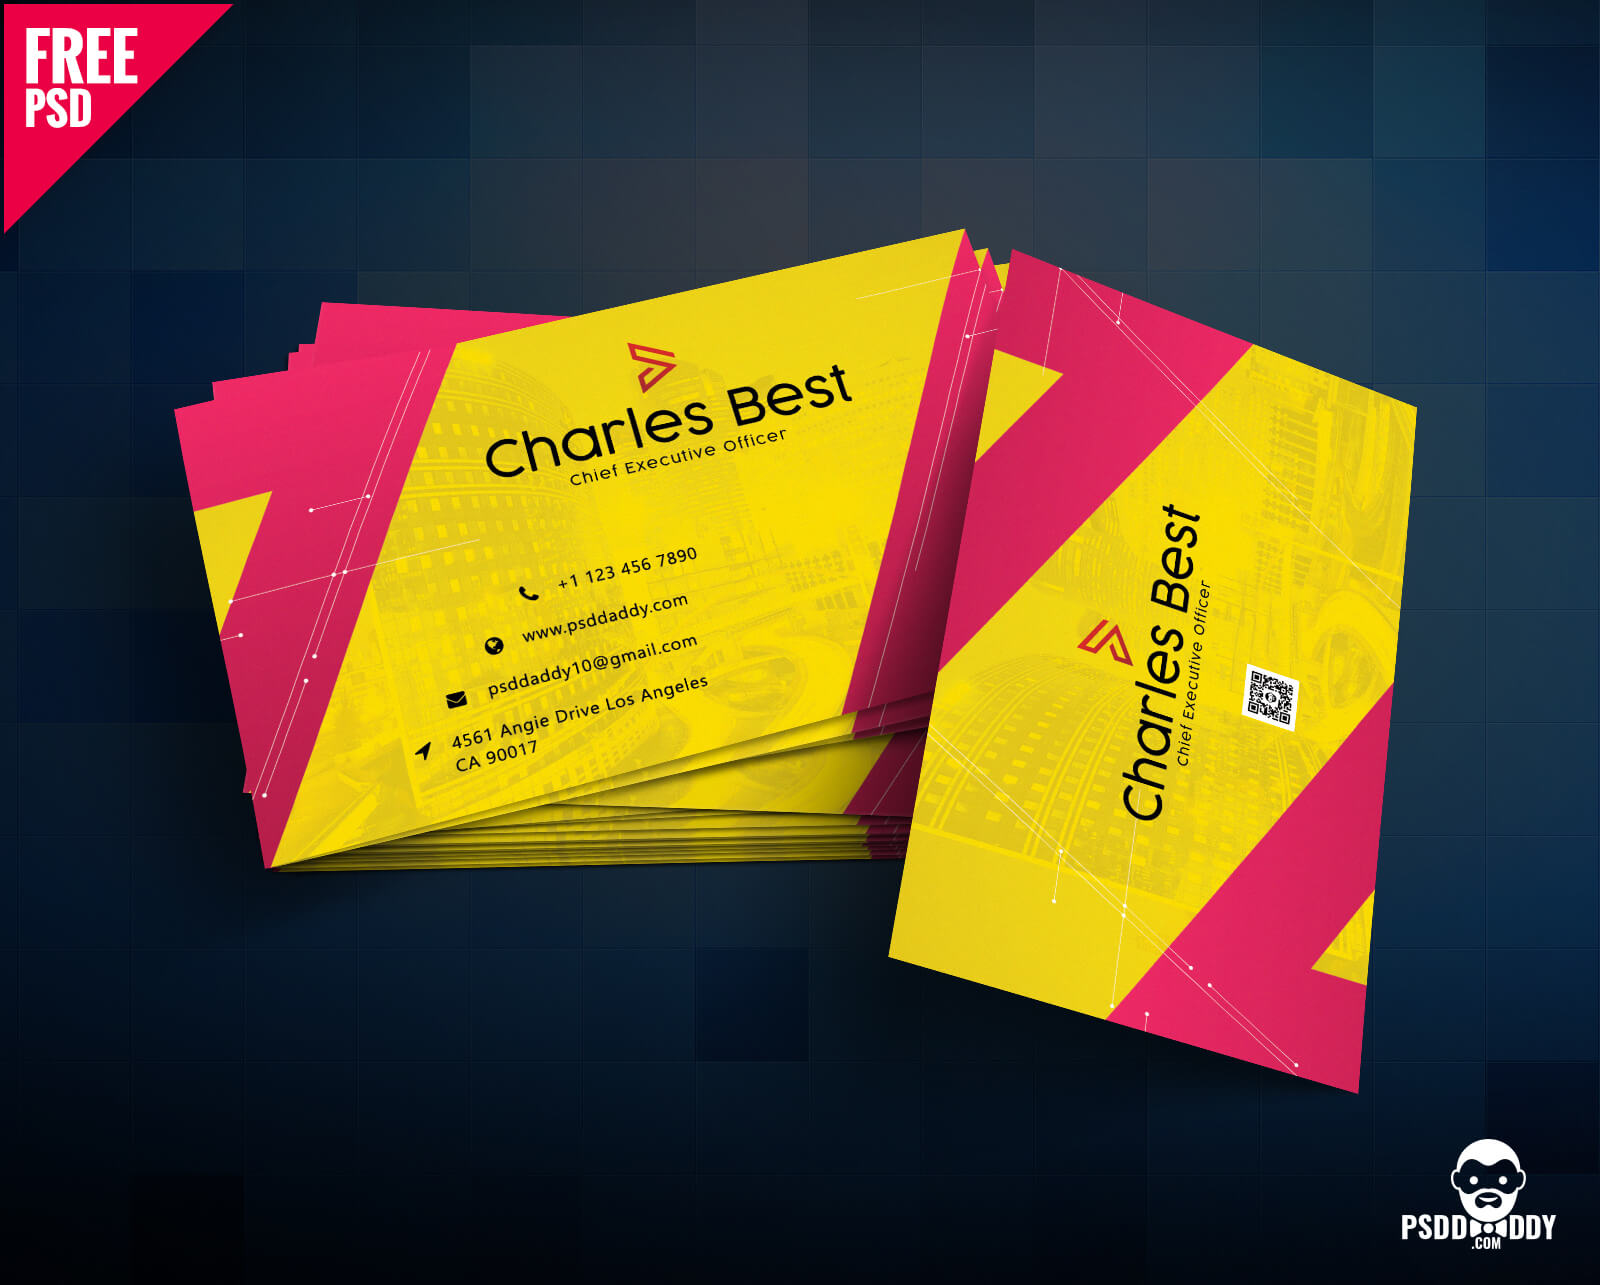 Download] Creative Business Card Free Psd | Psddaddy Inside Psd Visiting Card Templates